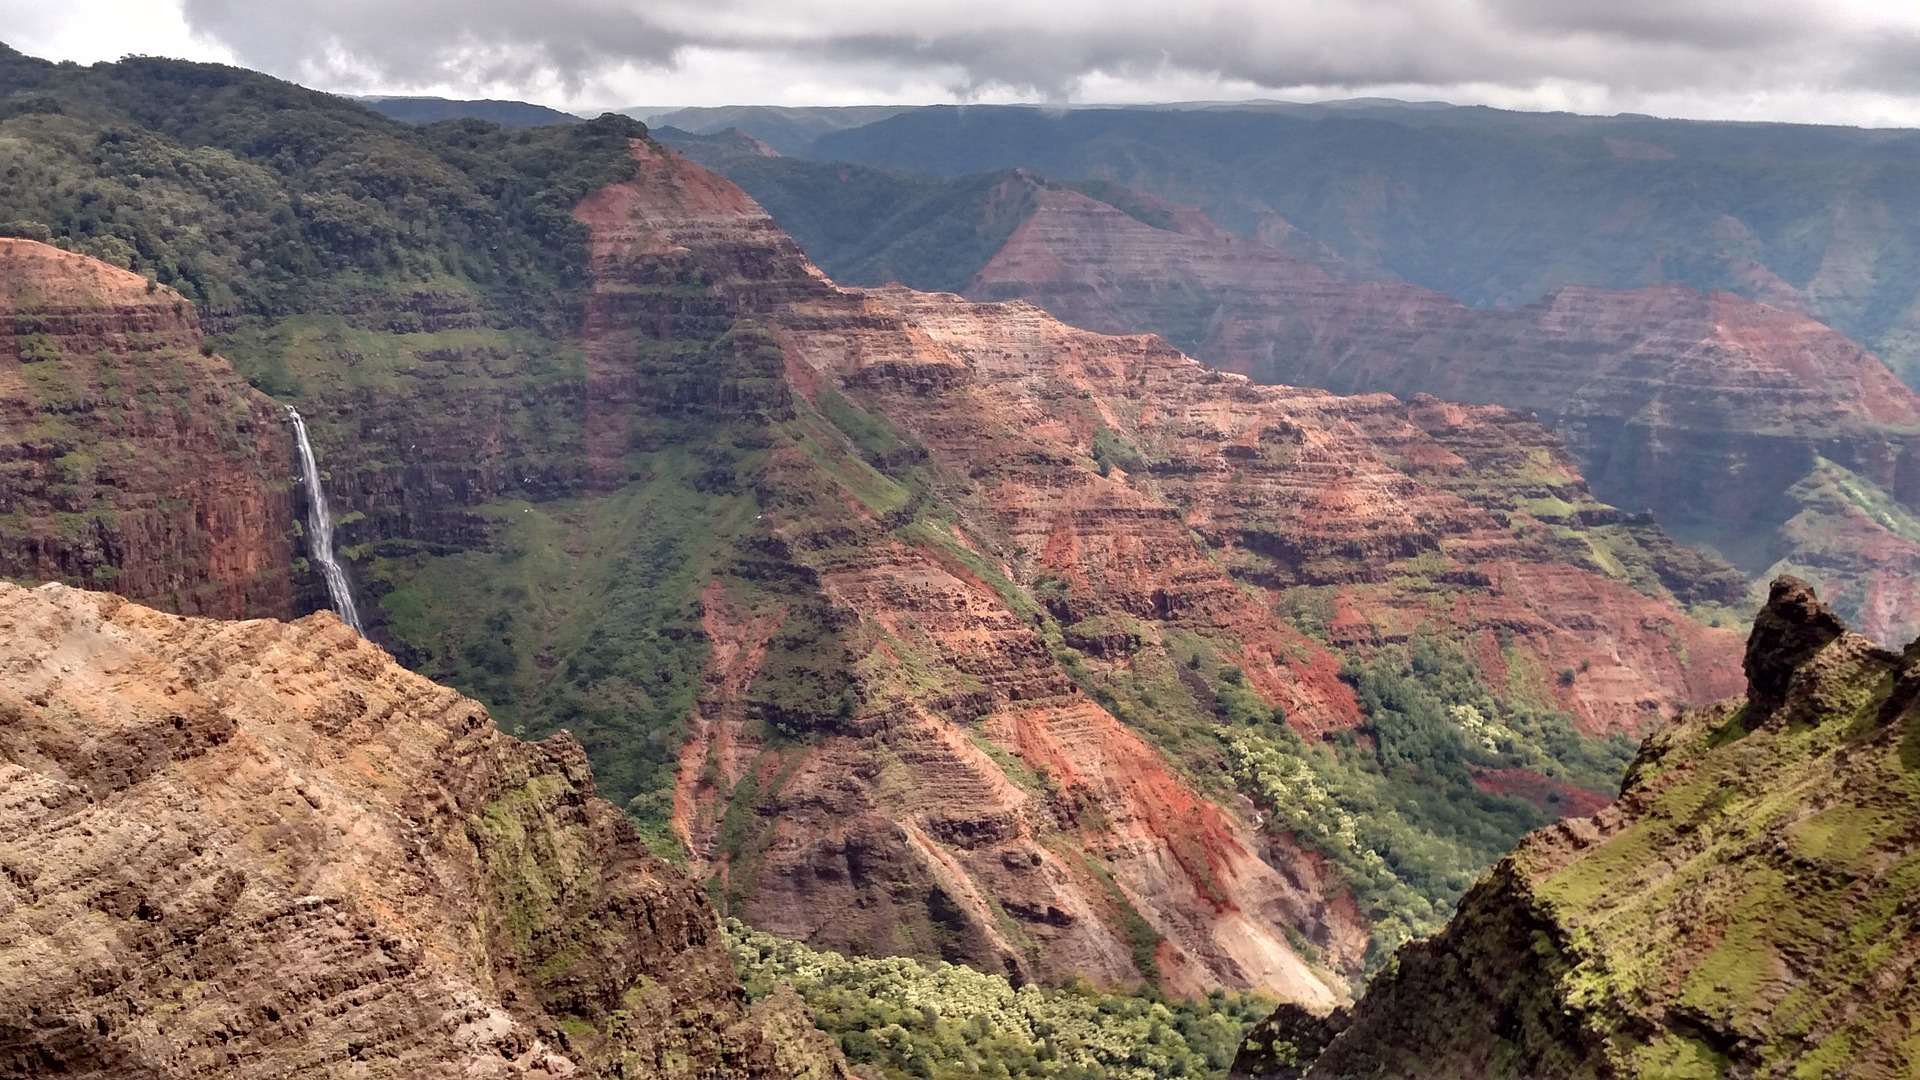 A view from Koke'e State Park in Kauai. This state park has some adventurous hiking trails to explore.